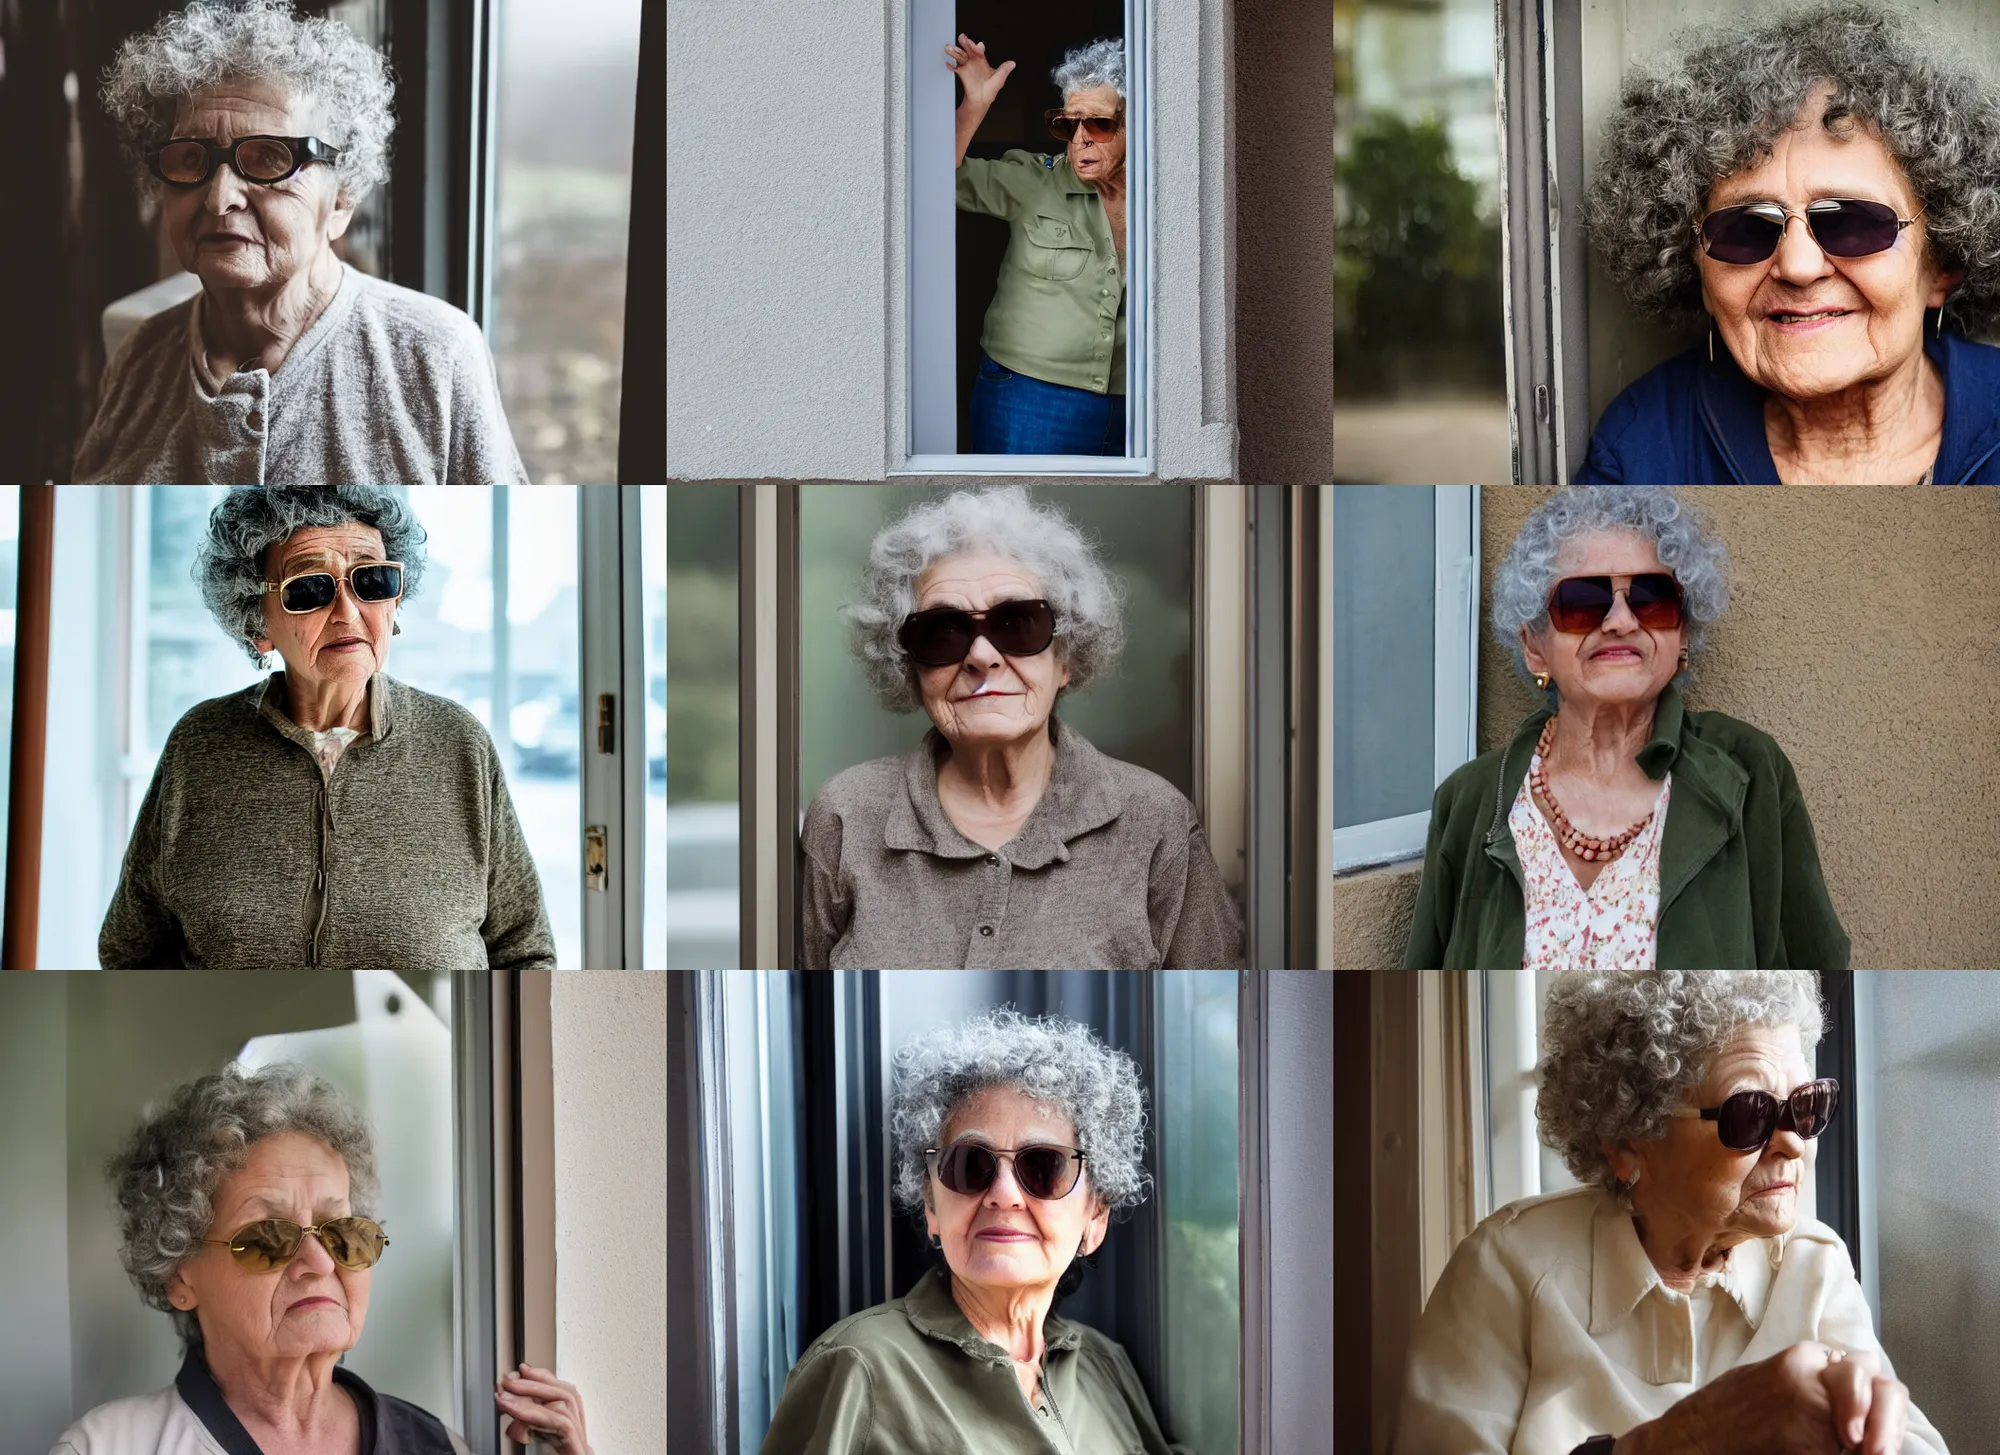 Prompt: an old lady with curly gray hair wearing dark aviator sunglasses standing behind a window looking at a mailmain wearing khaki pants